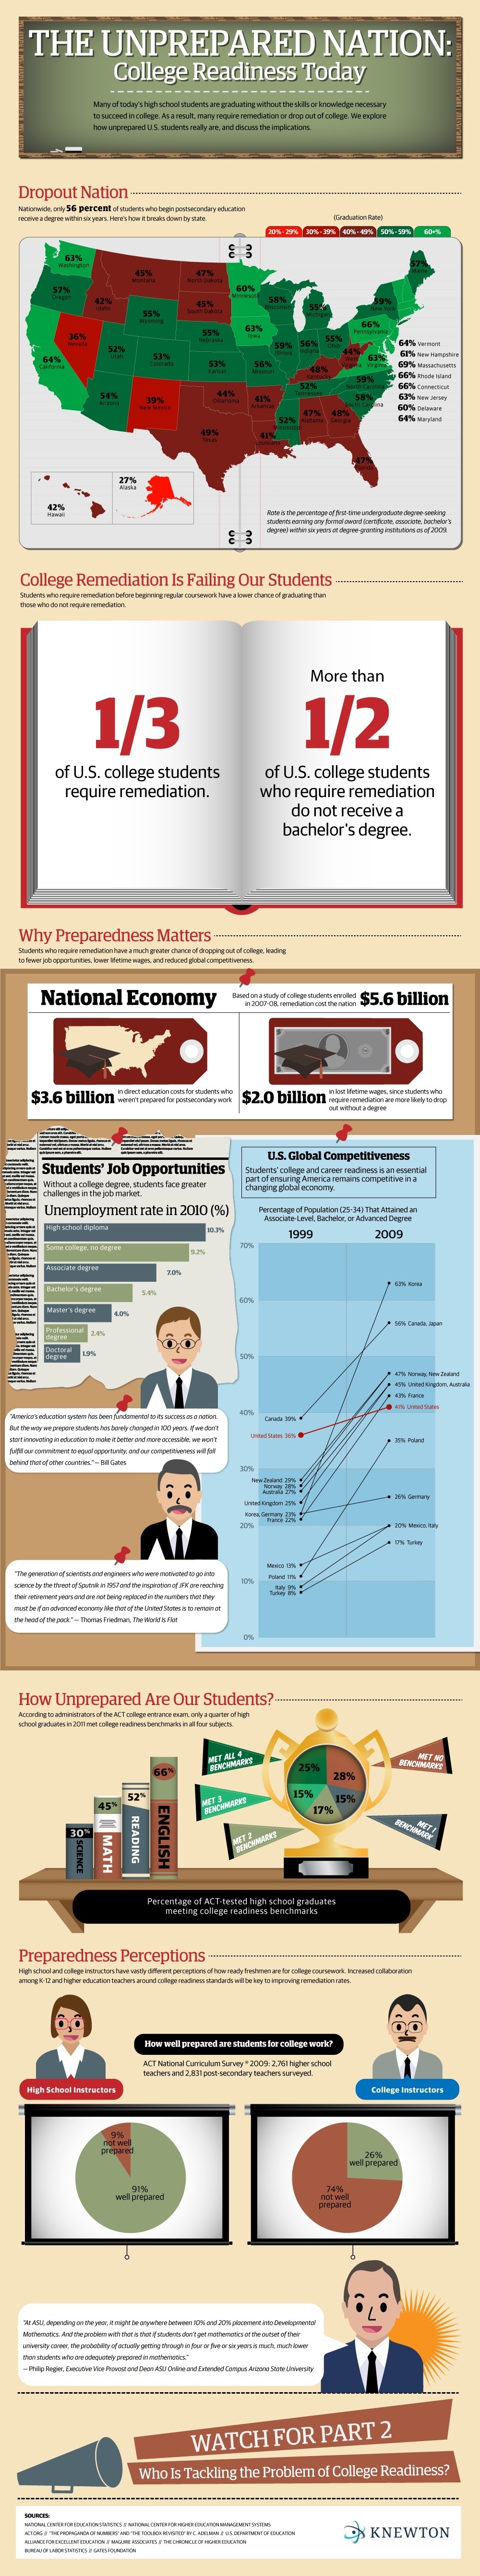 The Unprepared Nation: College Readiness Today Infographic